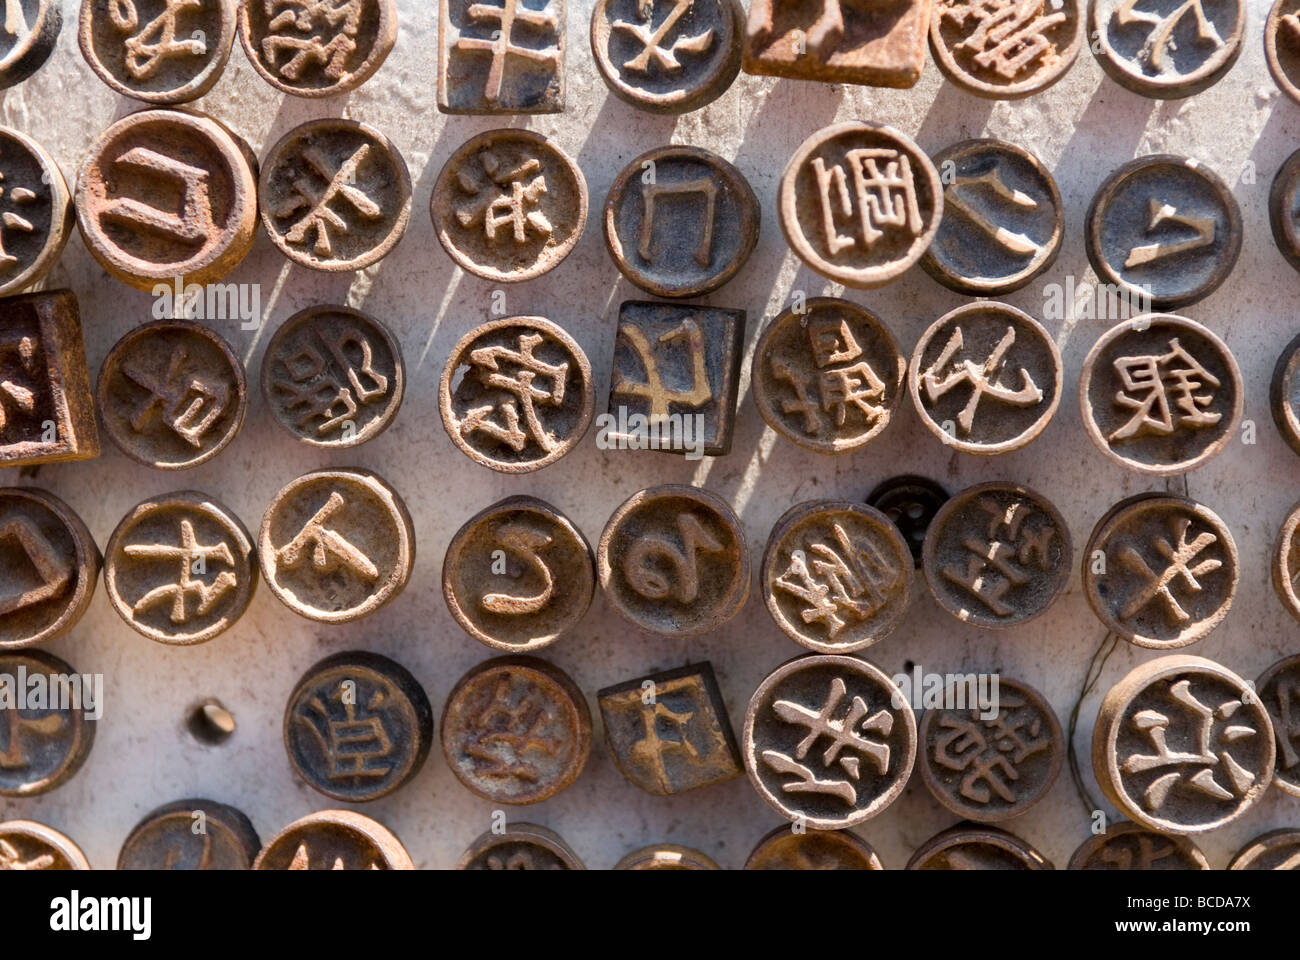 A collection of round antique hanko or name seals creates an interesting pattern at a flea market in Kyoto Japan Stock Photo